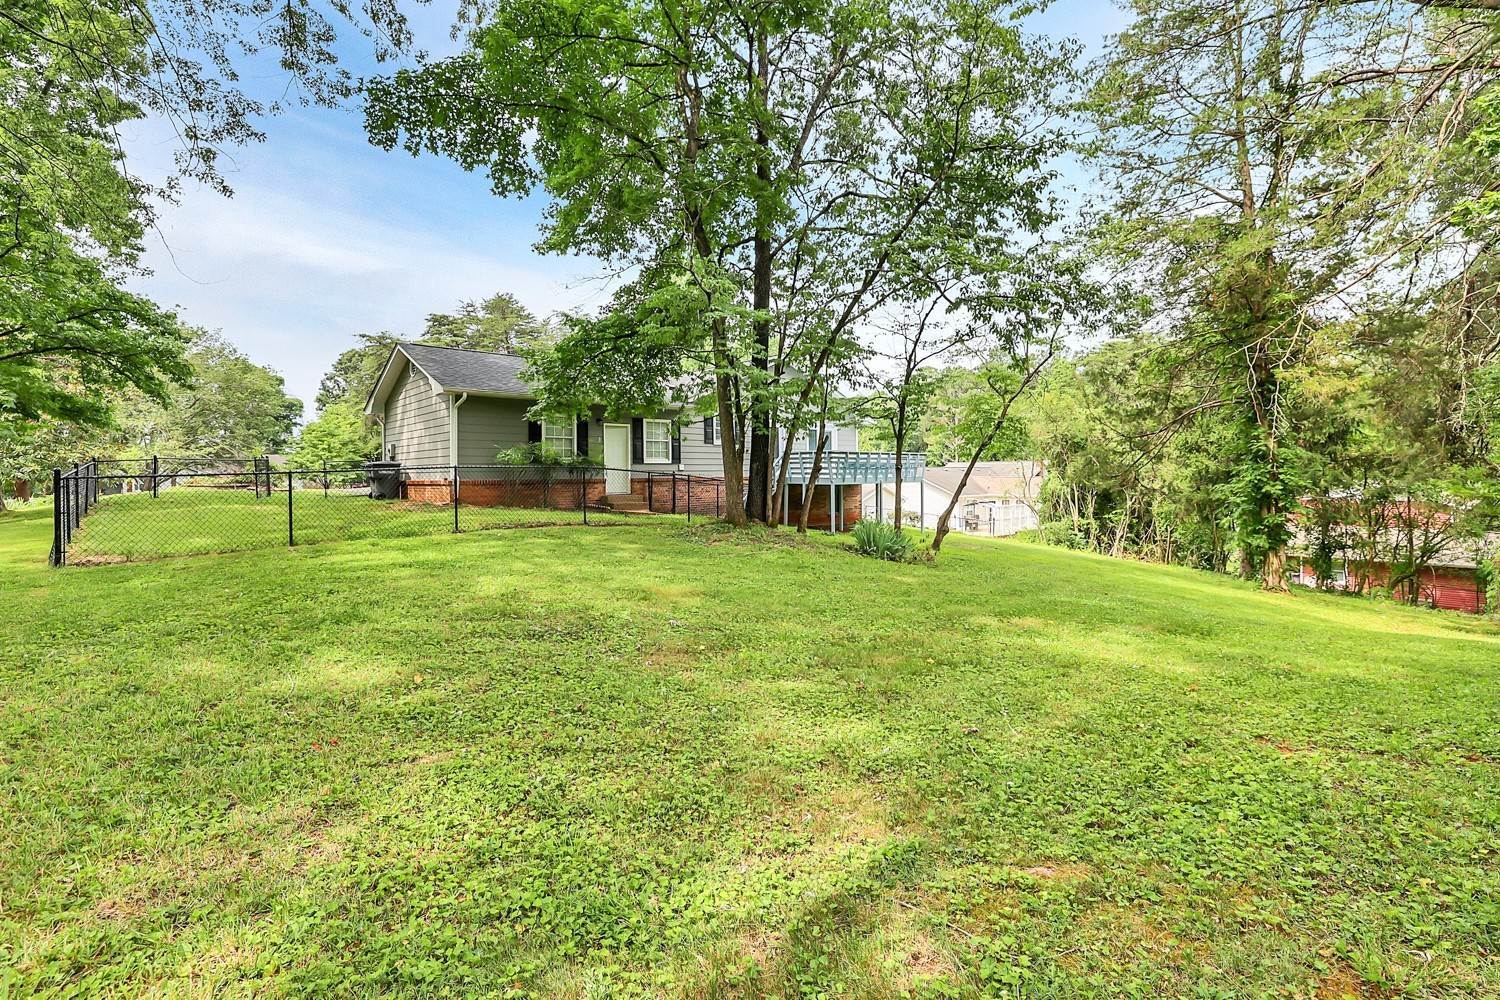 28. Single Family Homes for Sale at 1104 Tanglewood Dr, Cookeville, TN, 38501 1104 Tanglewood Dr Cookeville, Tennessee 38501 United States